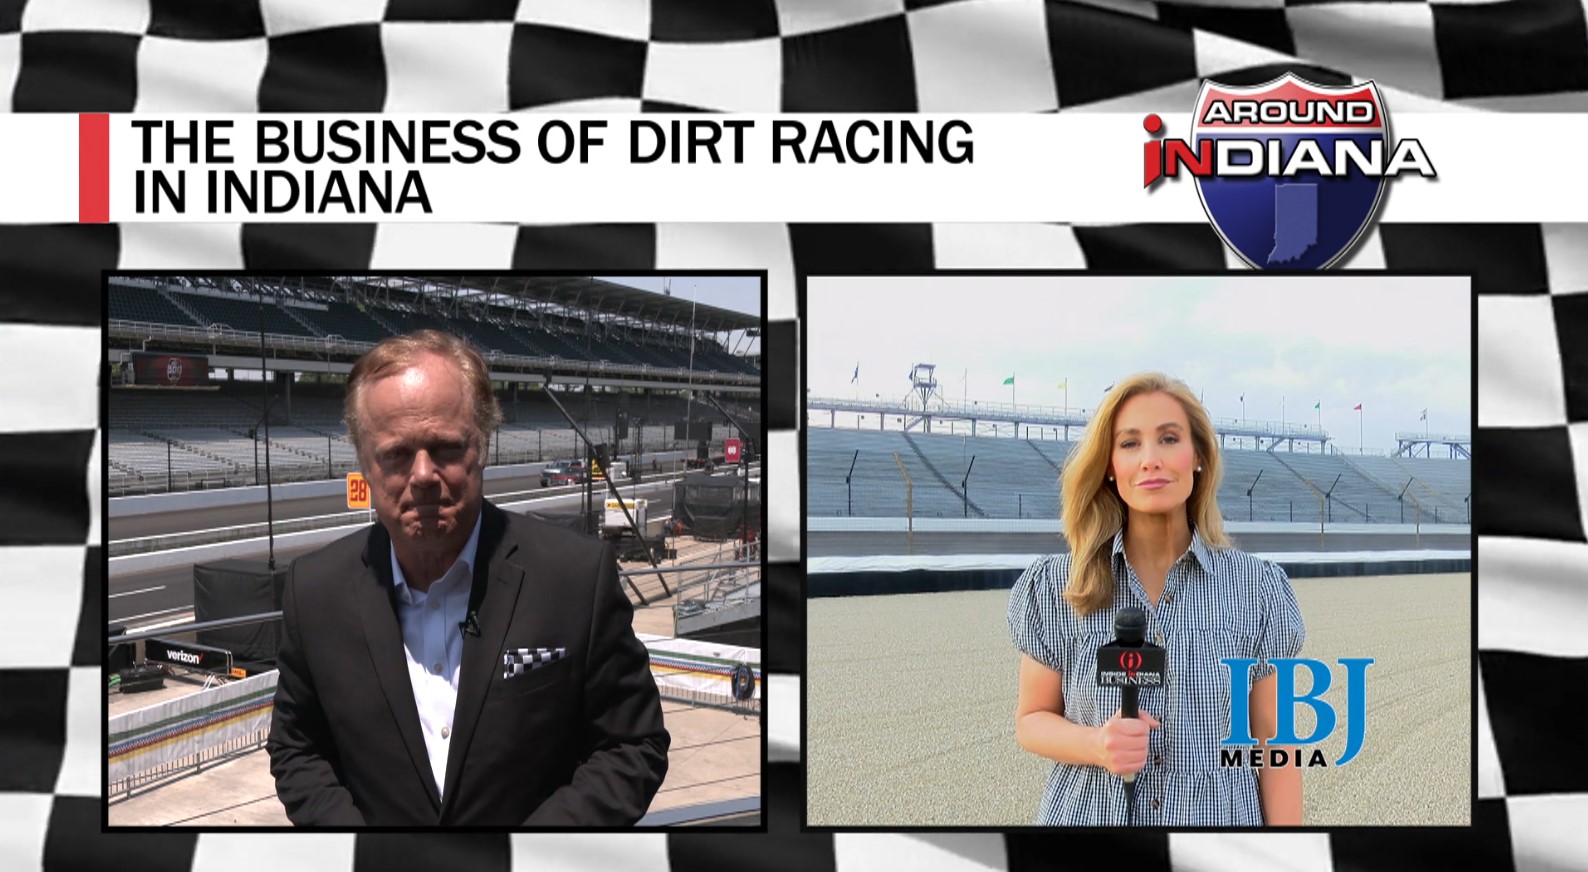 Around INdiana: The Business of Dirt Racing